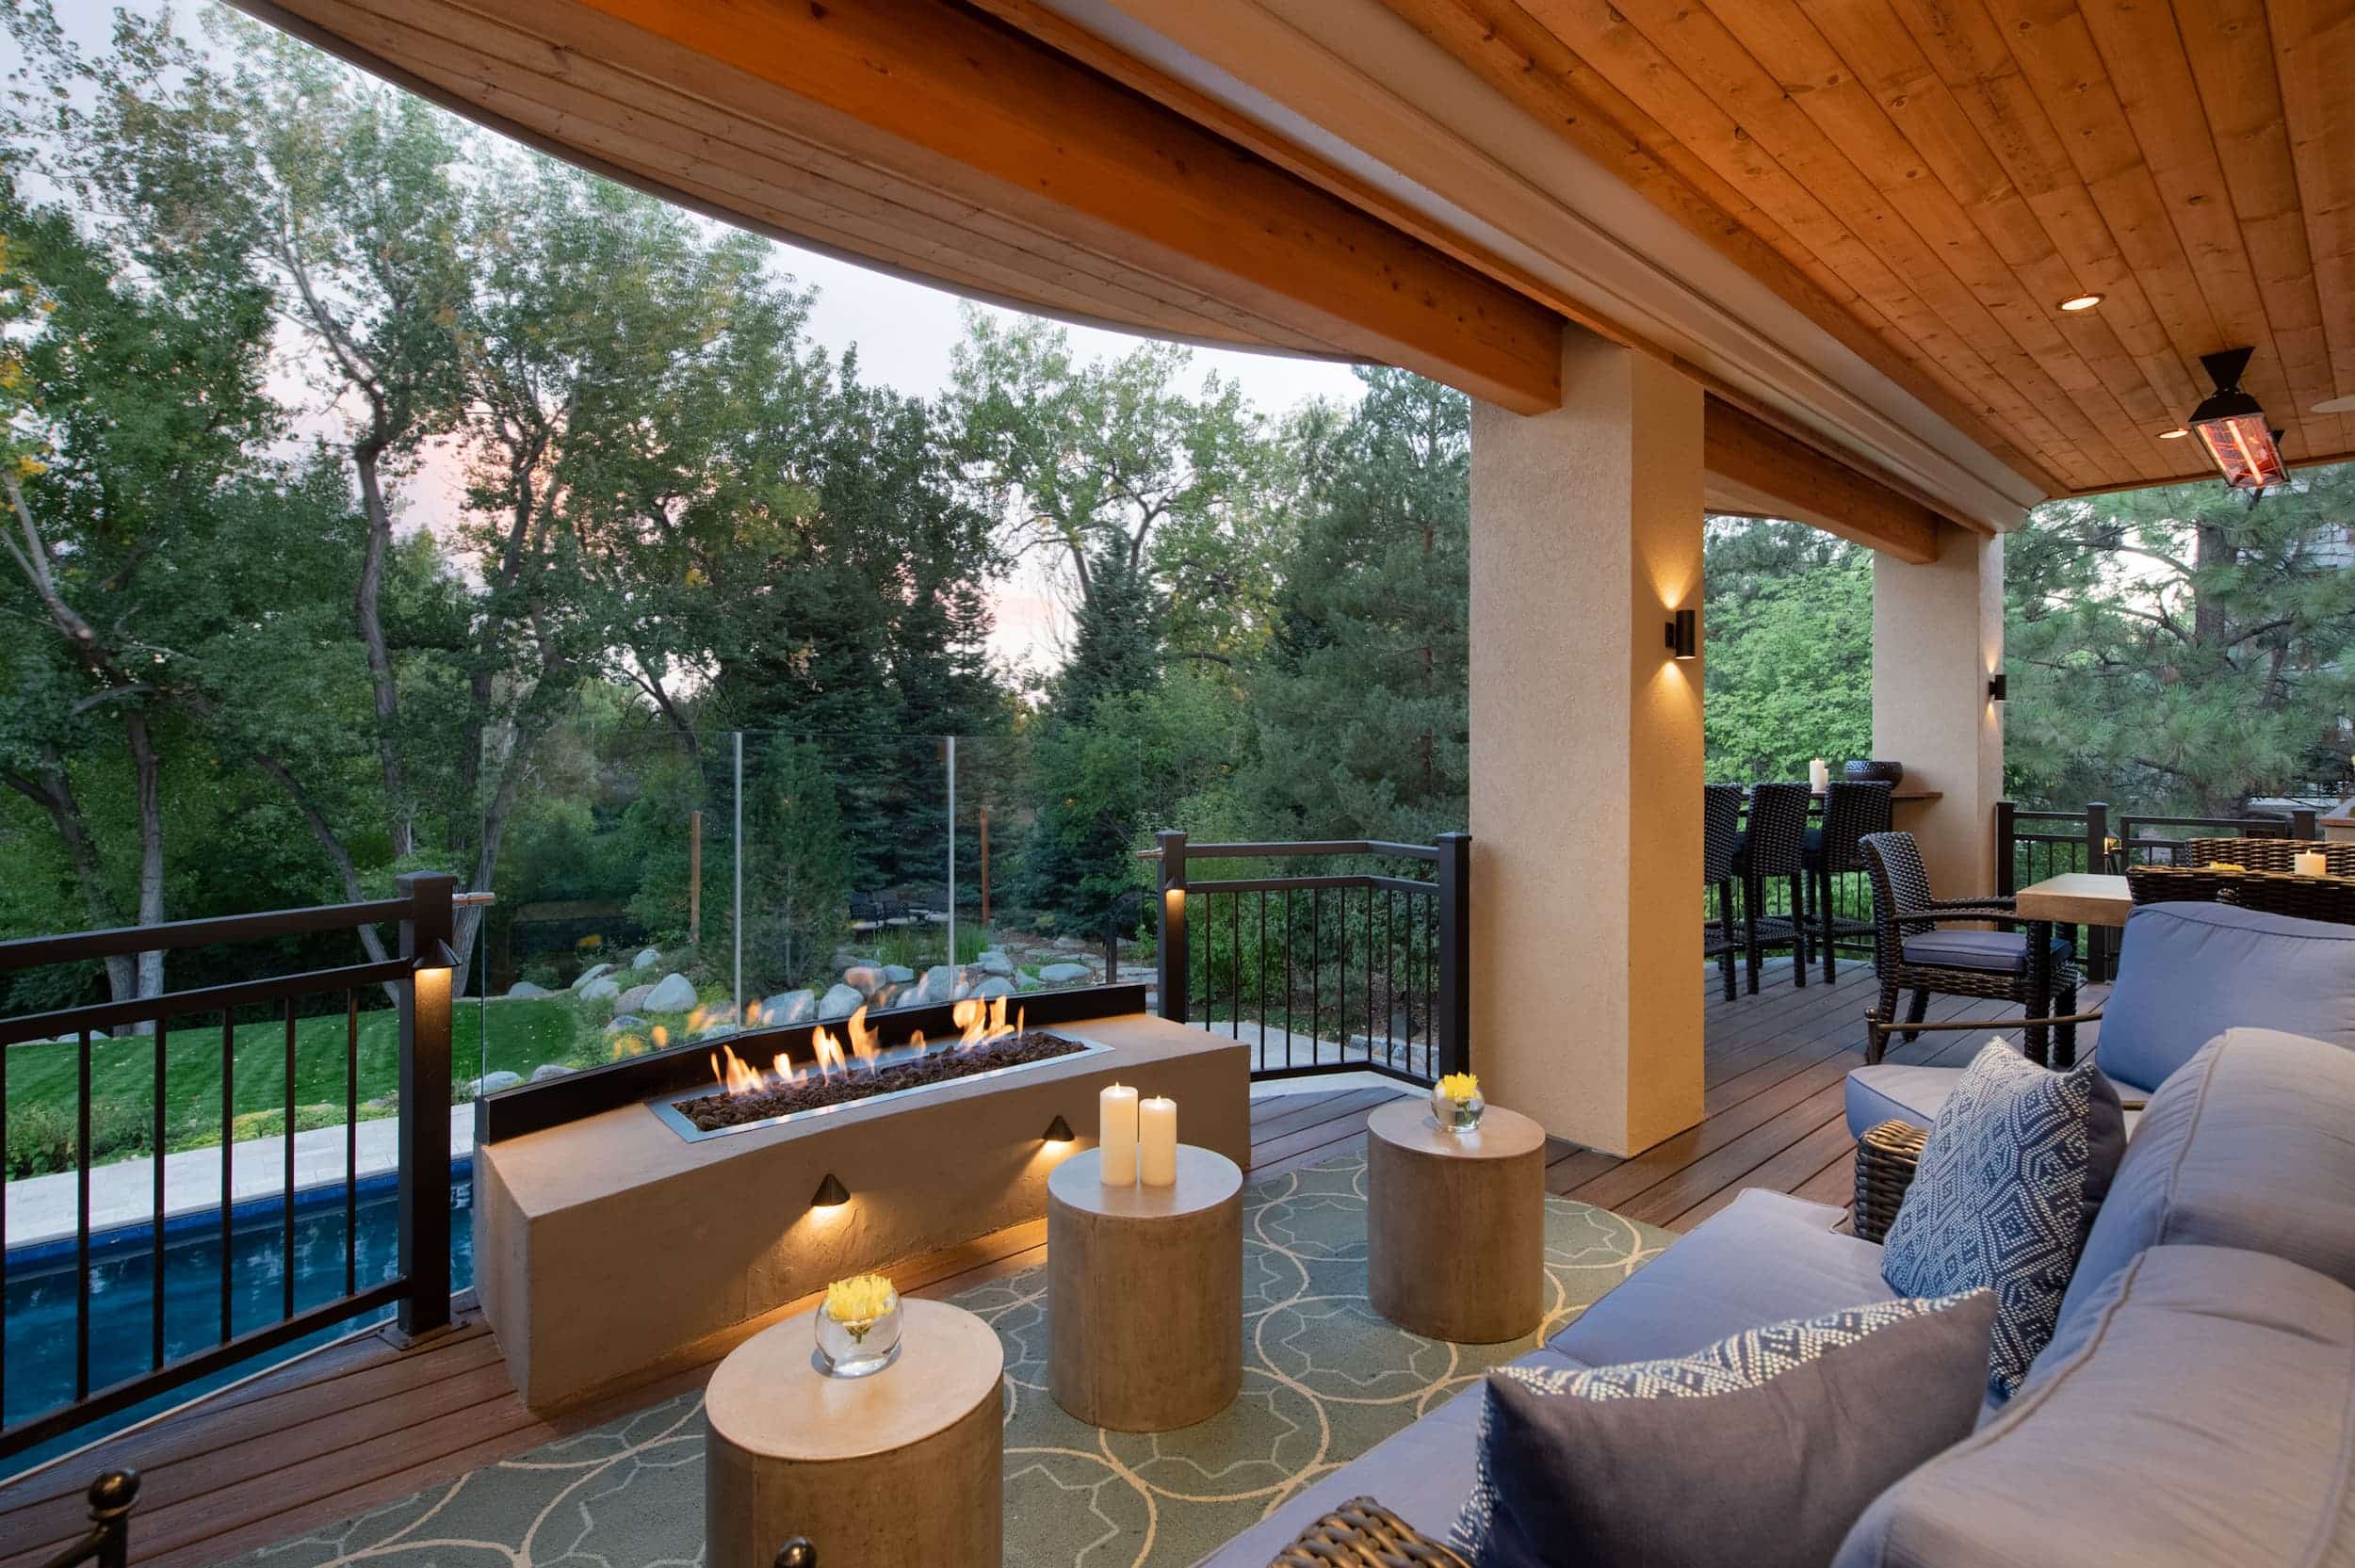 An outdoor living area with a fire pit and couches.